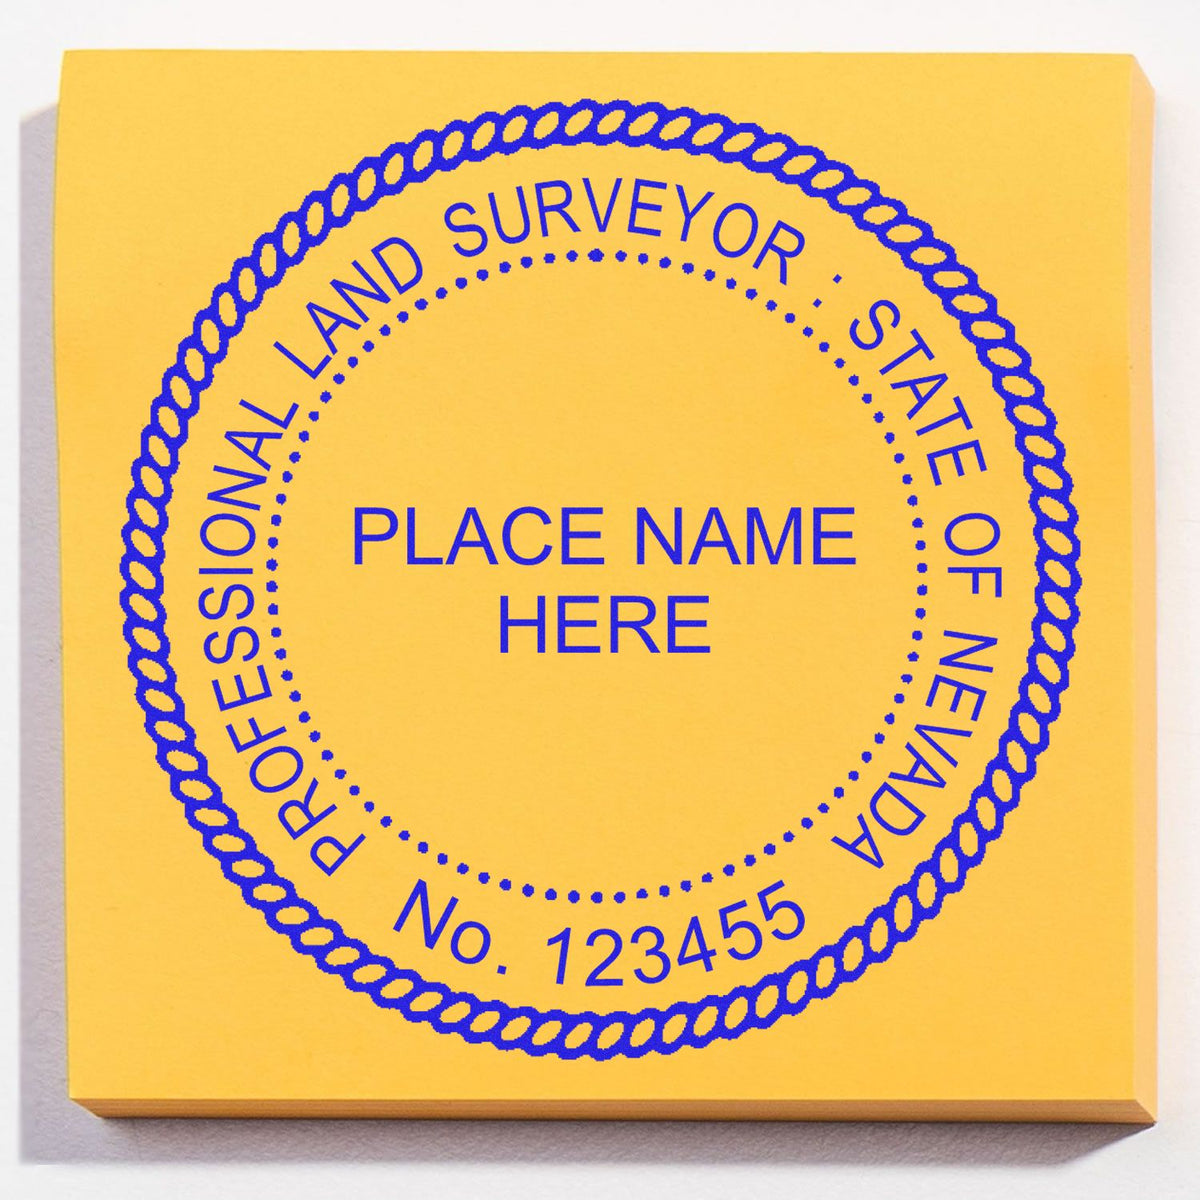 A lifestyle photo showing a stamped image of the Slim Pre-Inked Nevada Land Surveyor Seal Stamp on a piece of paper